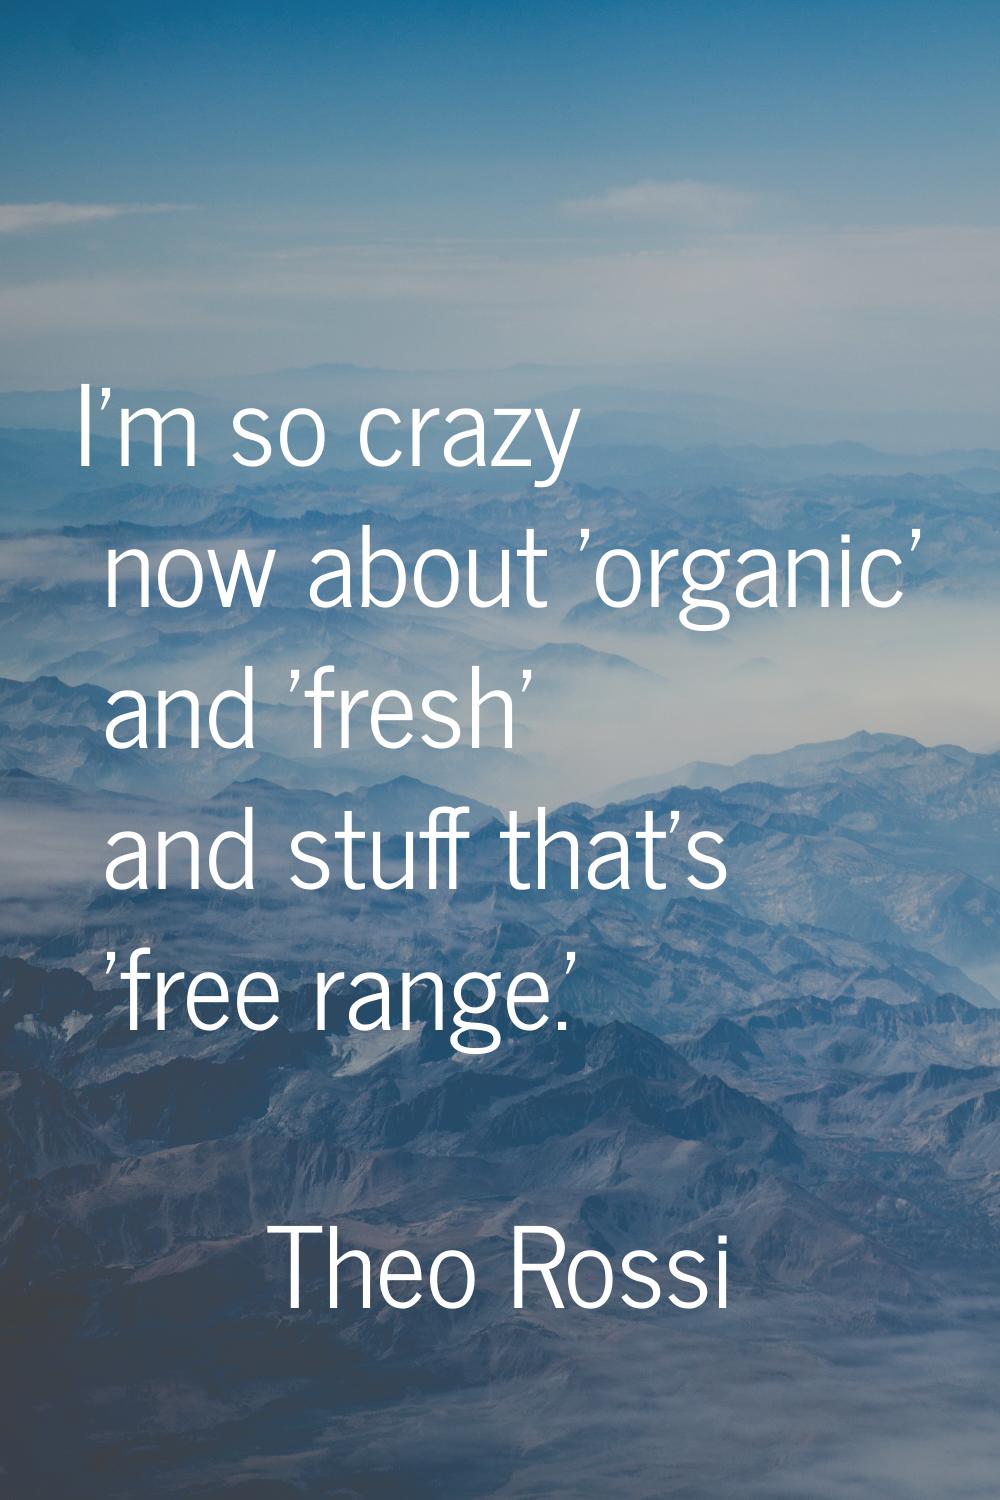 I'm so crazy now about 'organic' and 'fresh' and stuff that's 'free range.'